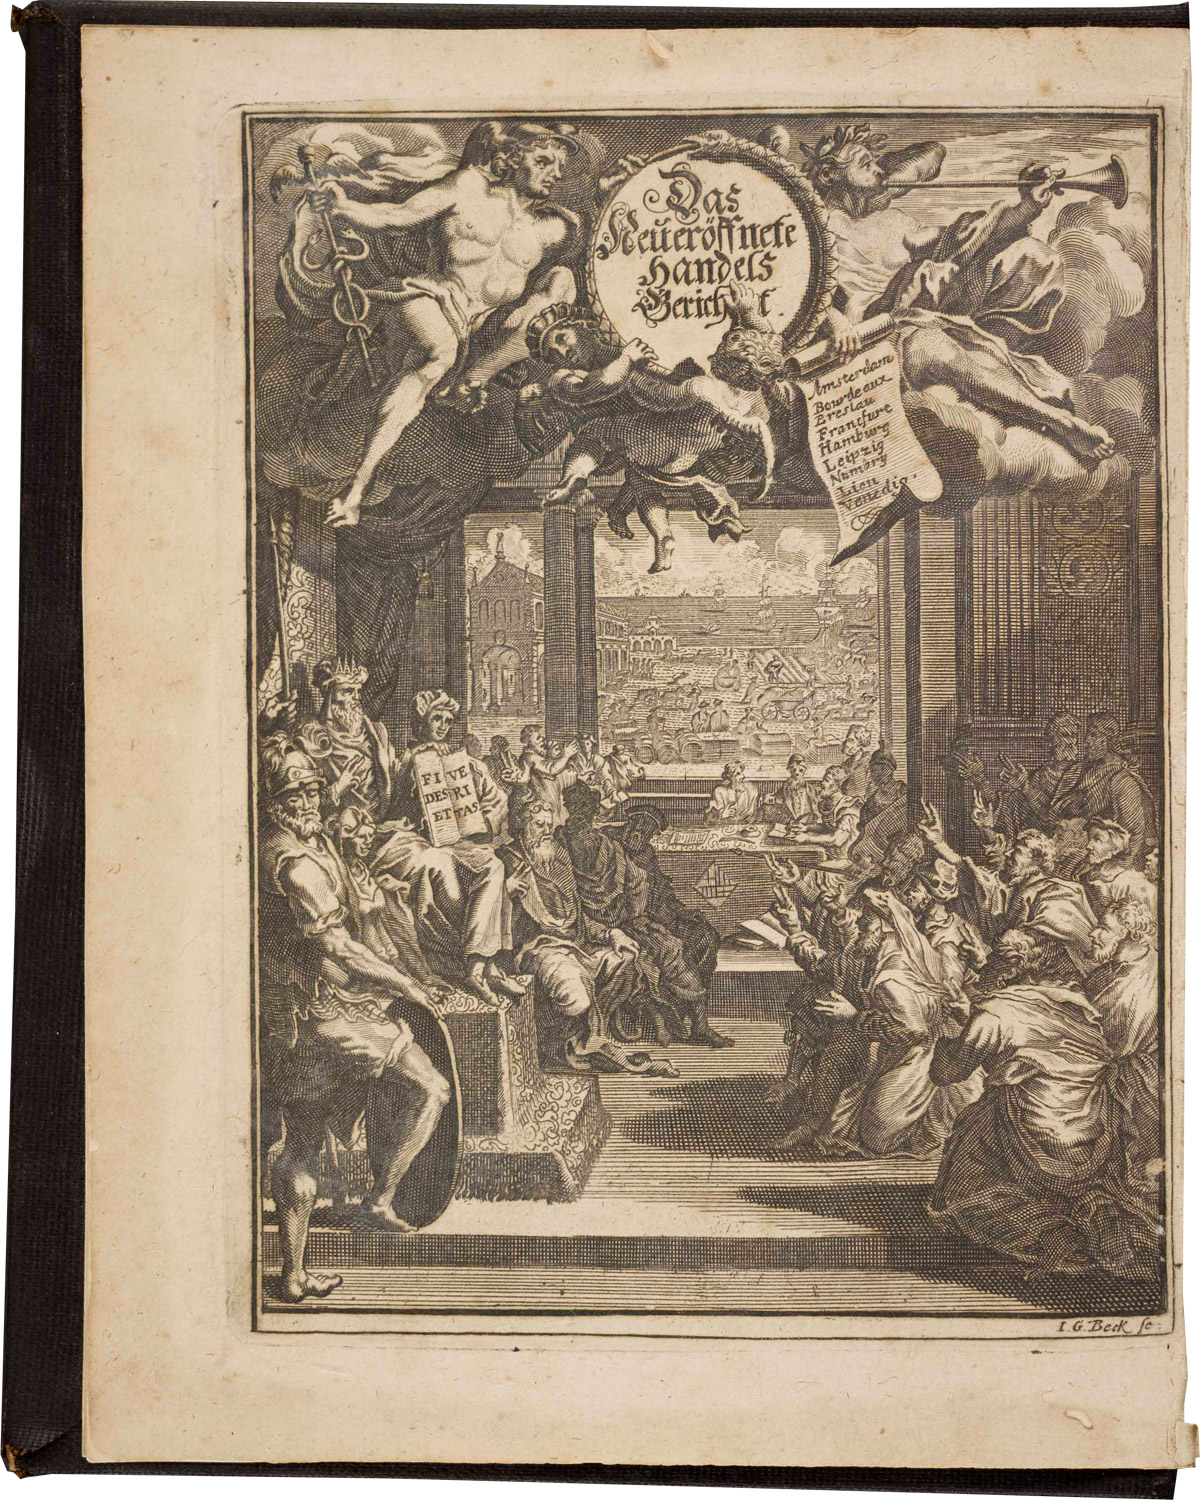 Frontispiece of the 1709 printing